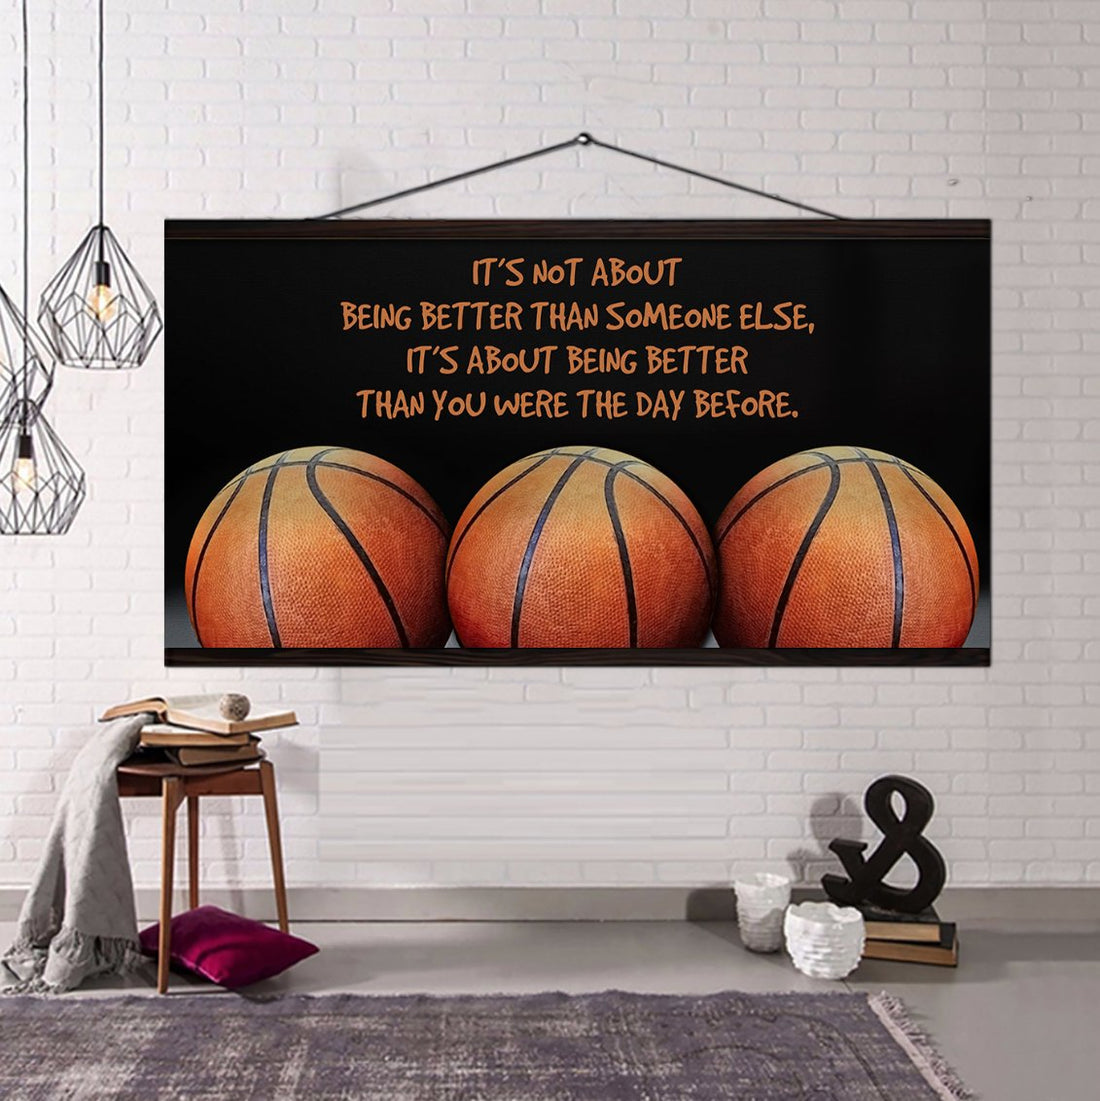 Baketball Ver 6 It is not About Being Better Than Someone Else It is about being better than you were the day before